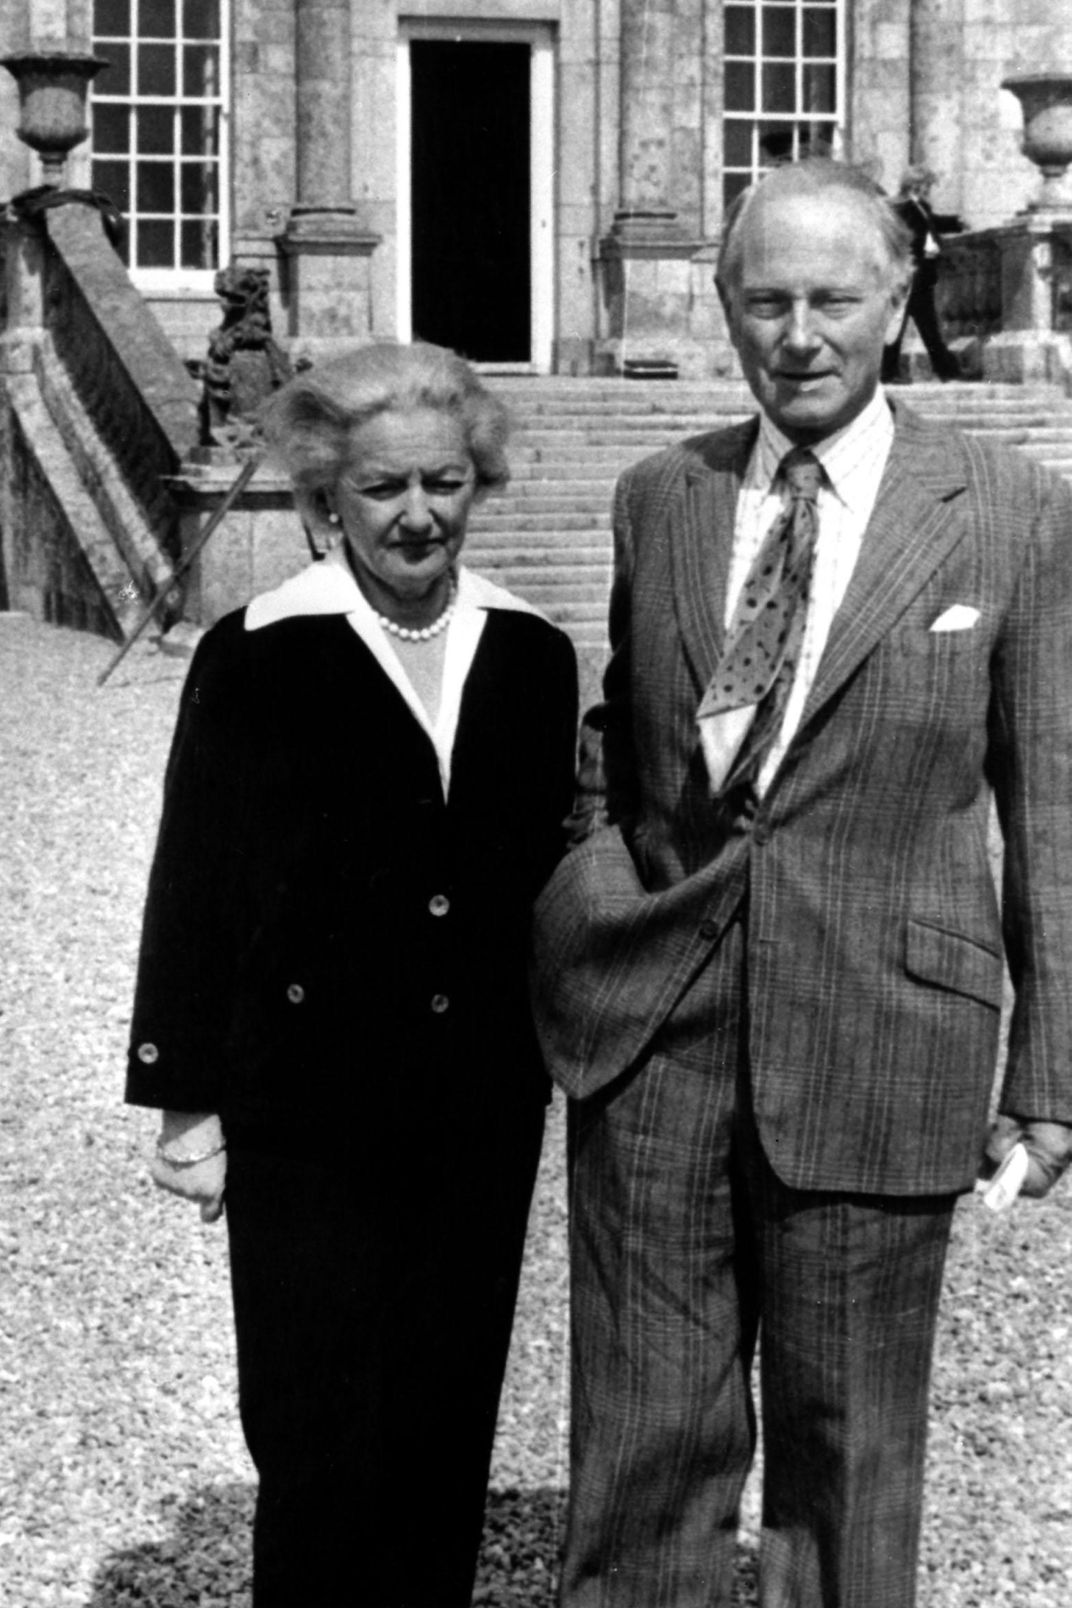 Sir Alfred Lane Beit and his wife, Lady Clementine Beit